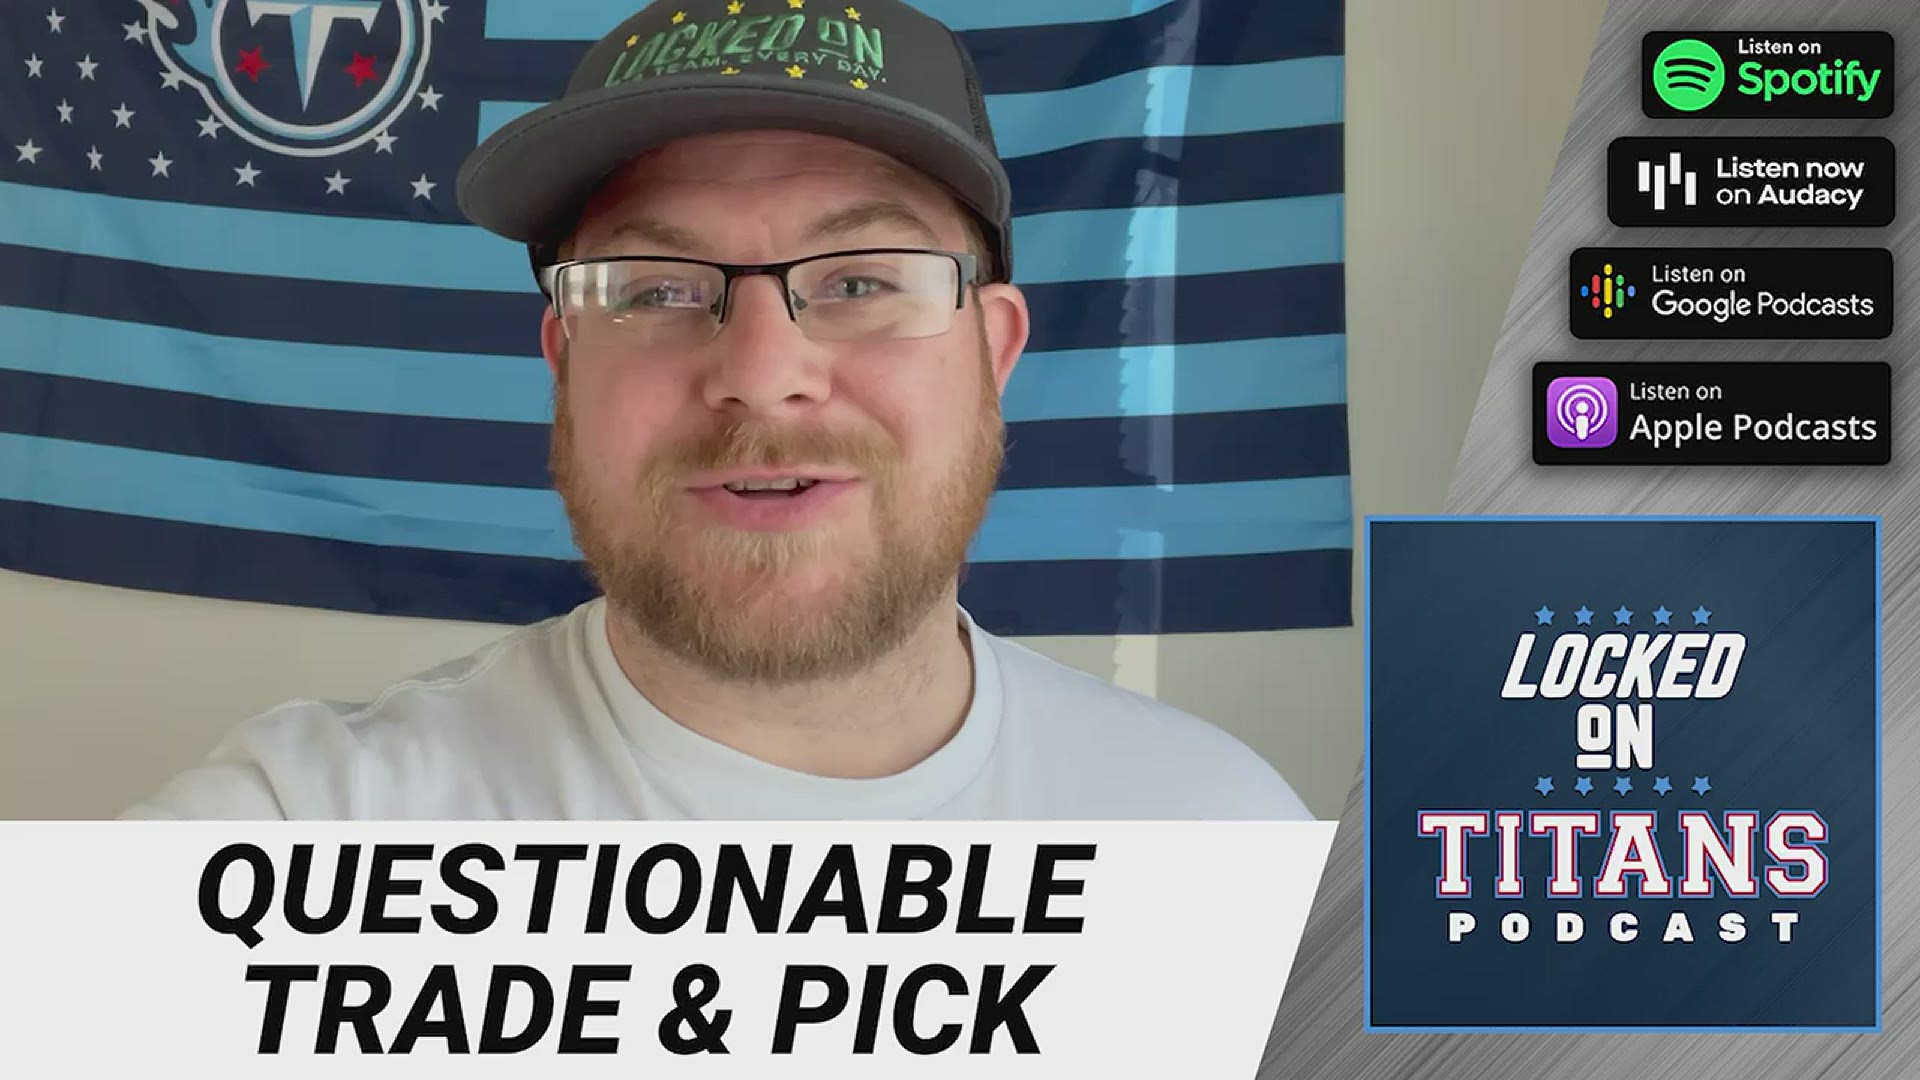 The host of the Locked On Titans podcast reacts to the team trading picks in the fourth round of the NFL Draft